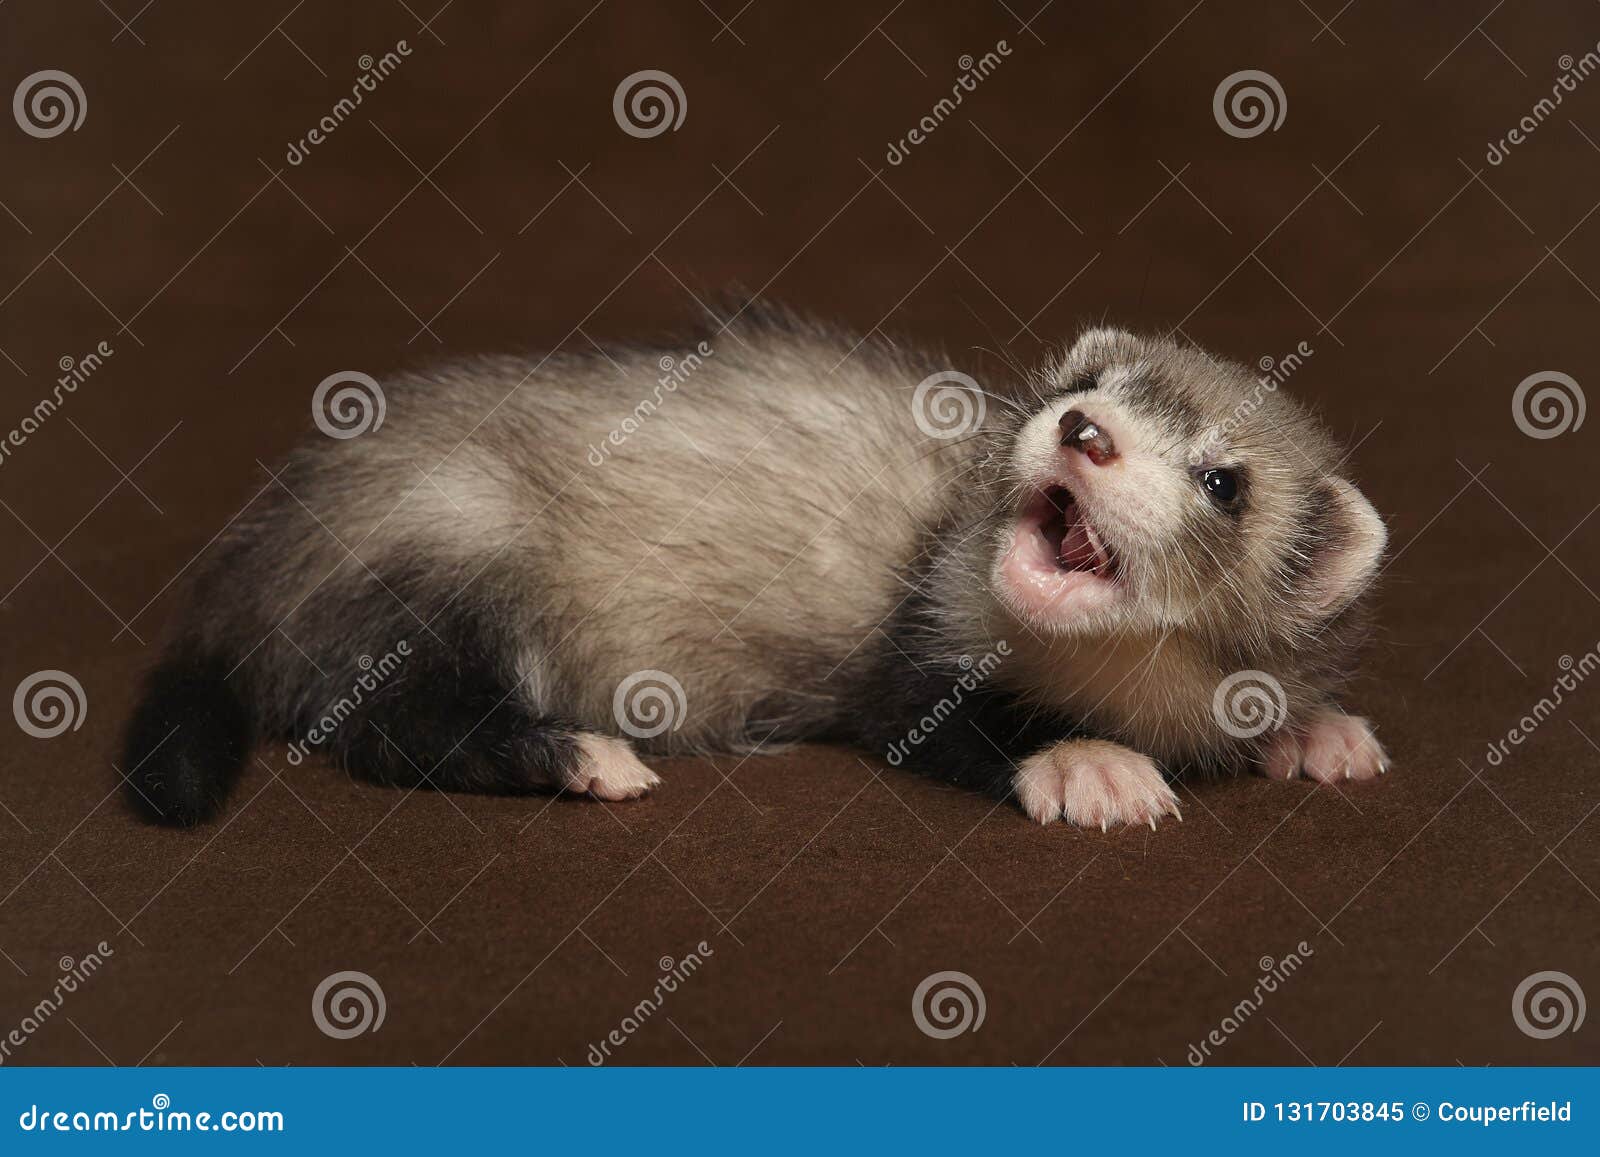 Dark Sable Young Ferret Baby Laying In Studio Stock Image Image Of Communication Indoors 131703845